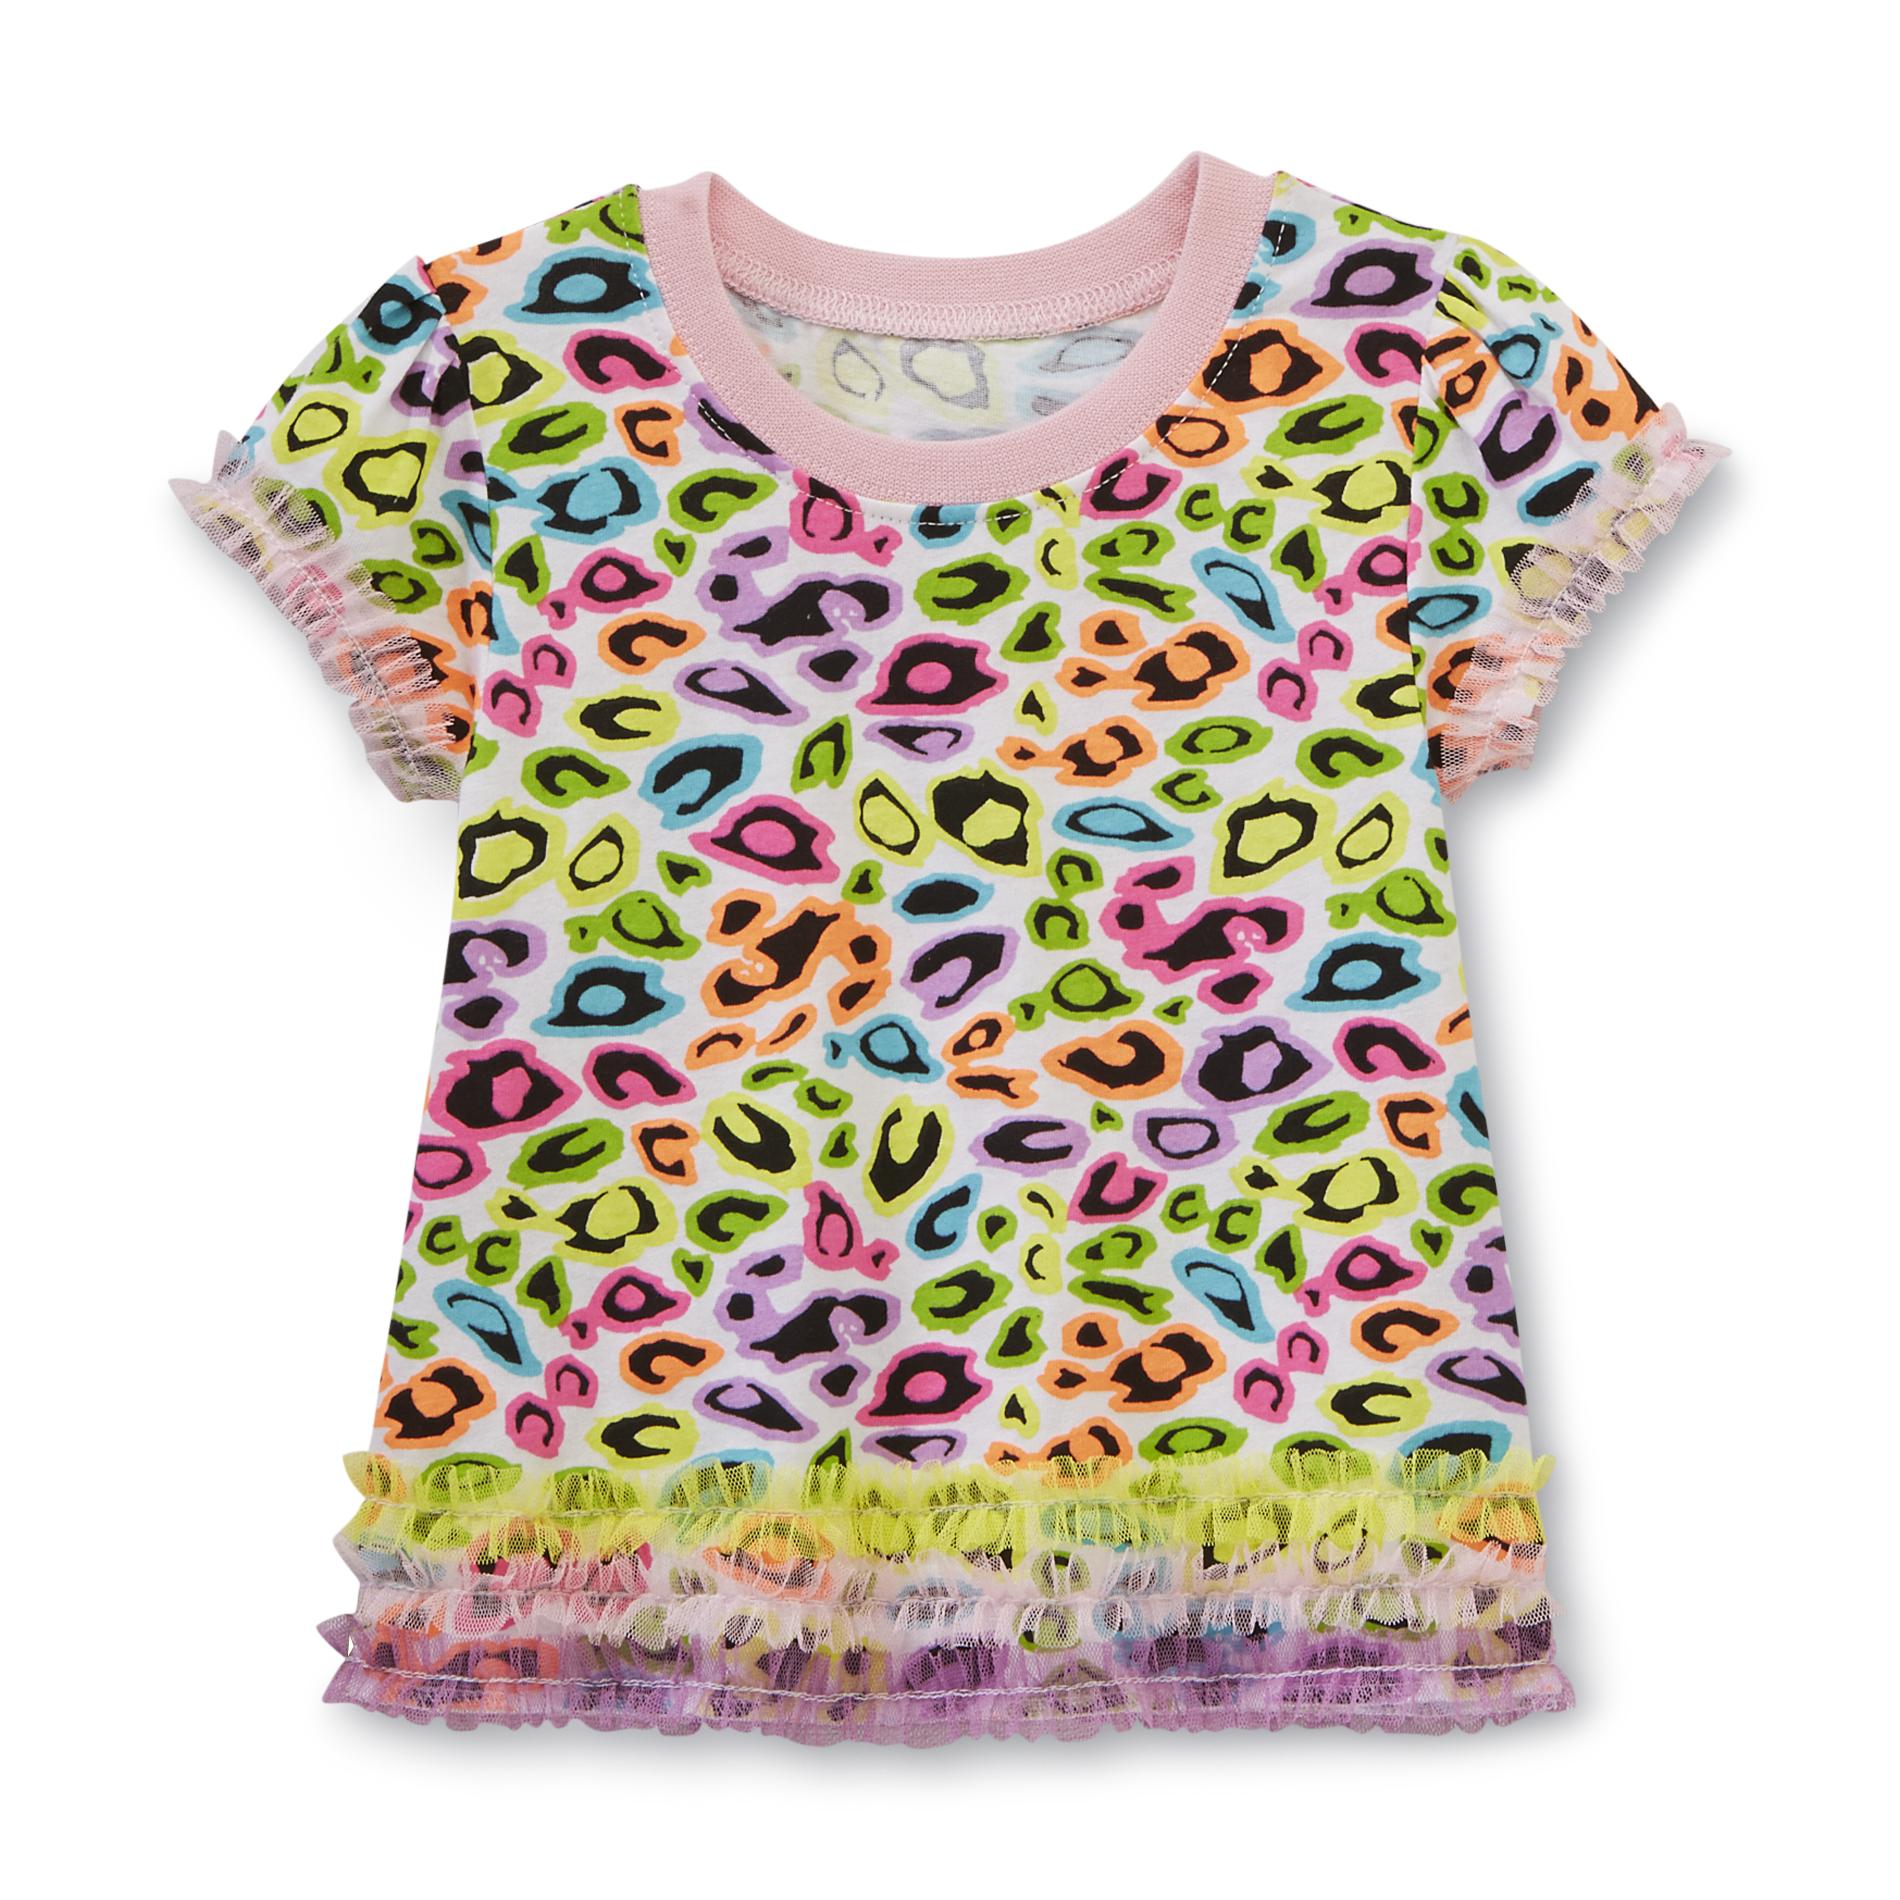 Piper Infant & Toddler Girl's Tulle Ruffle Top - Neon Leopard Print